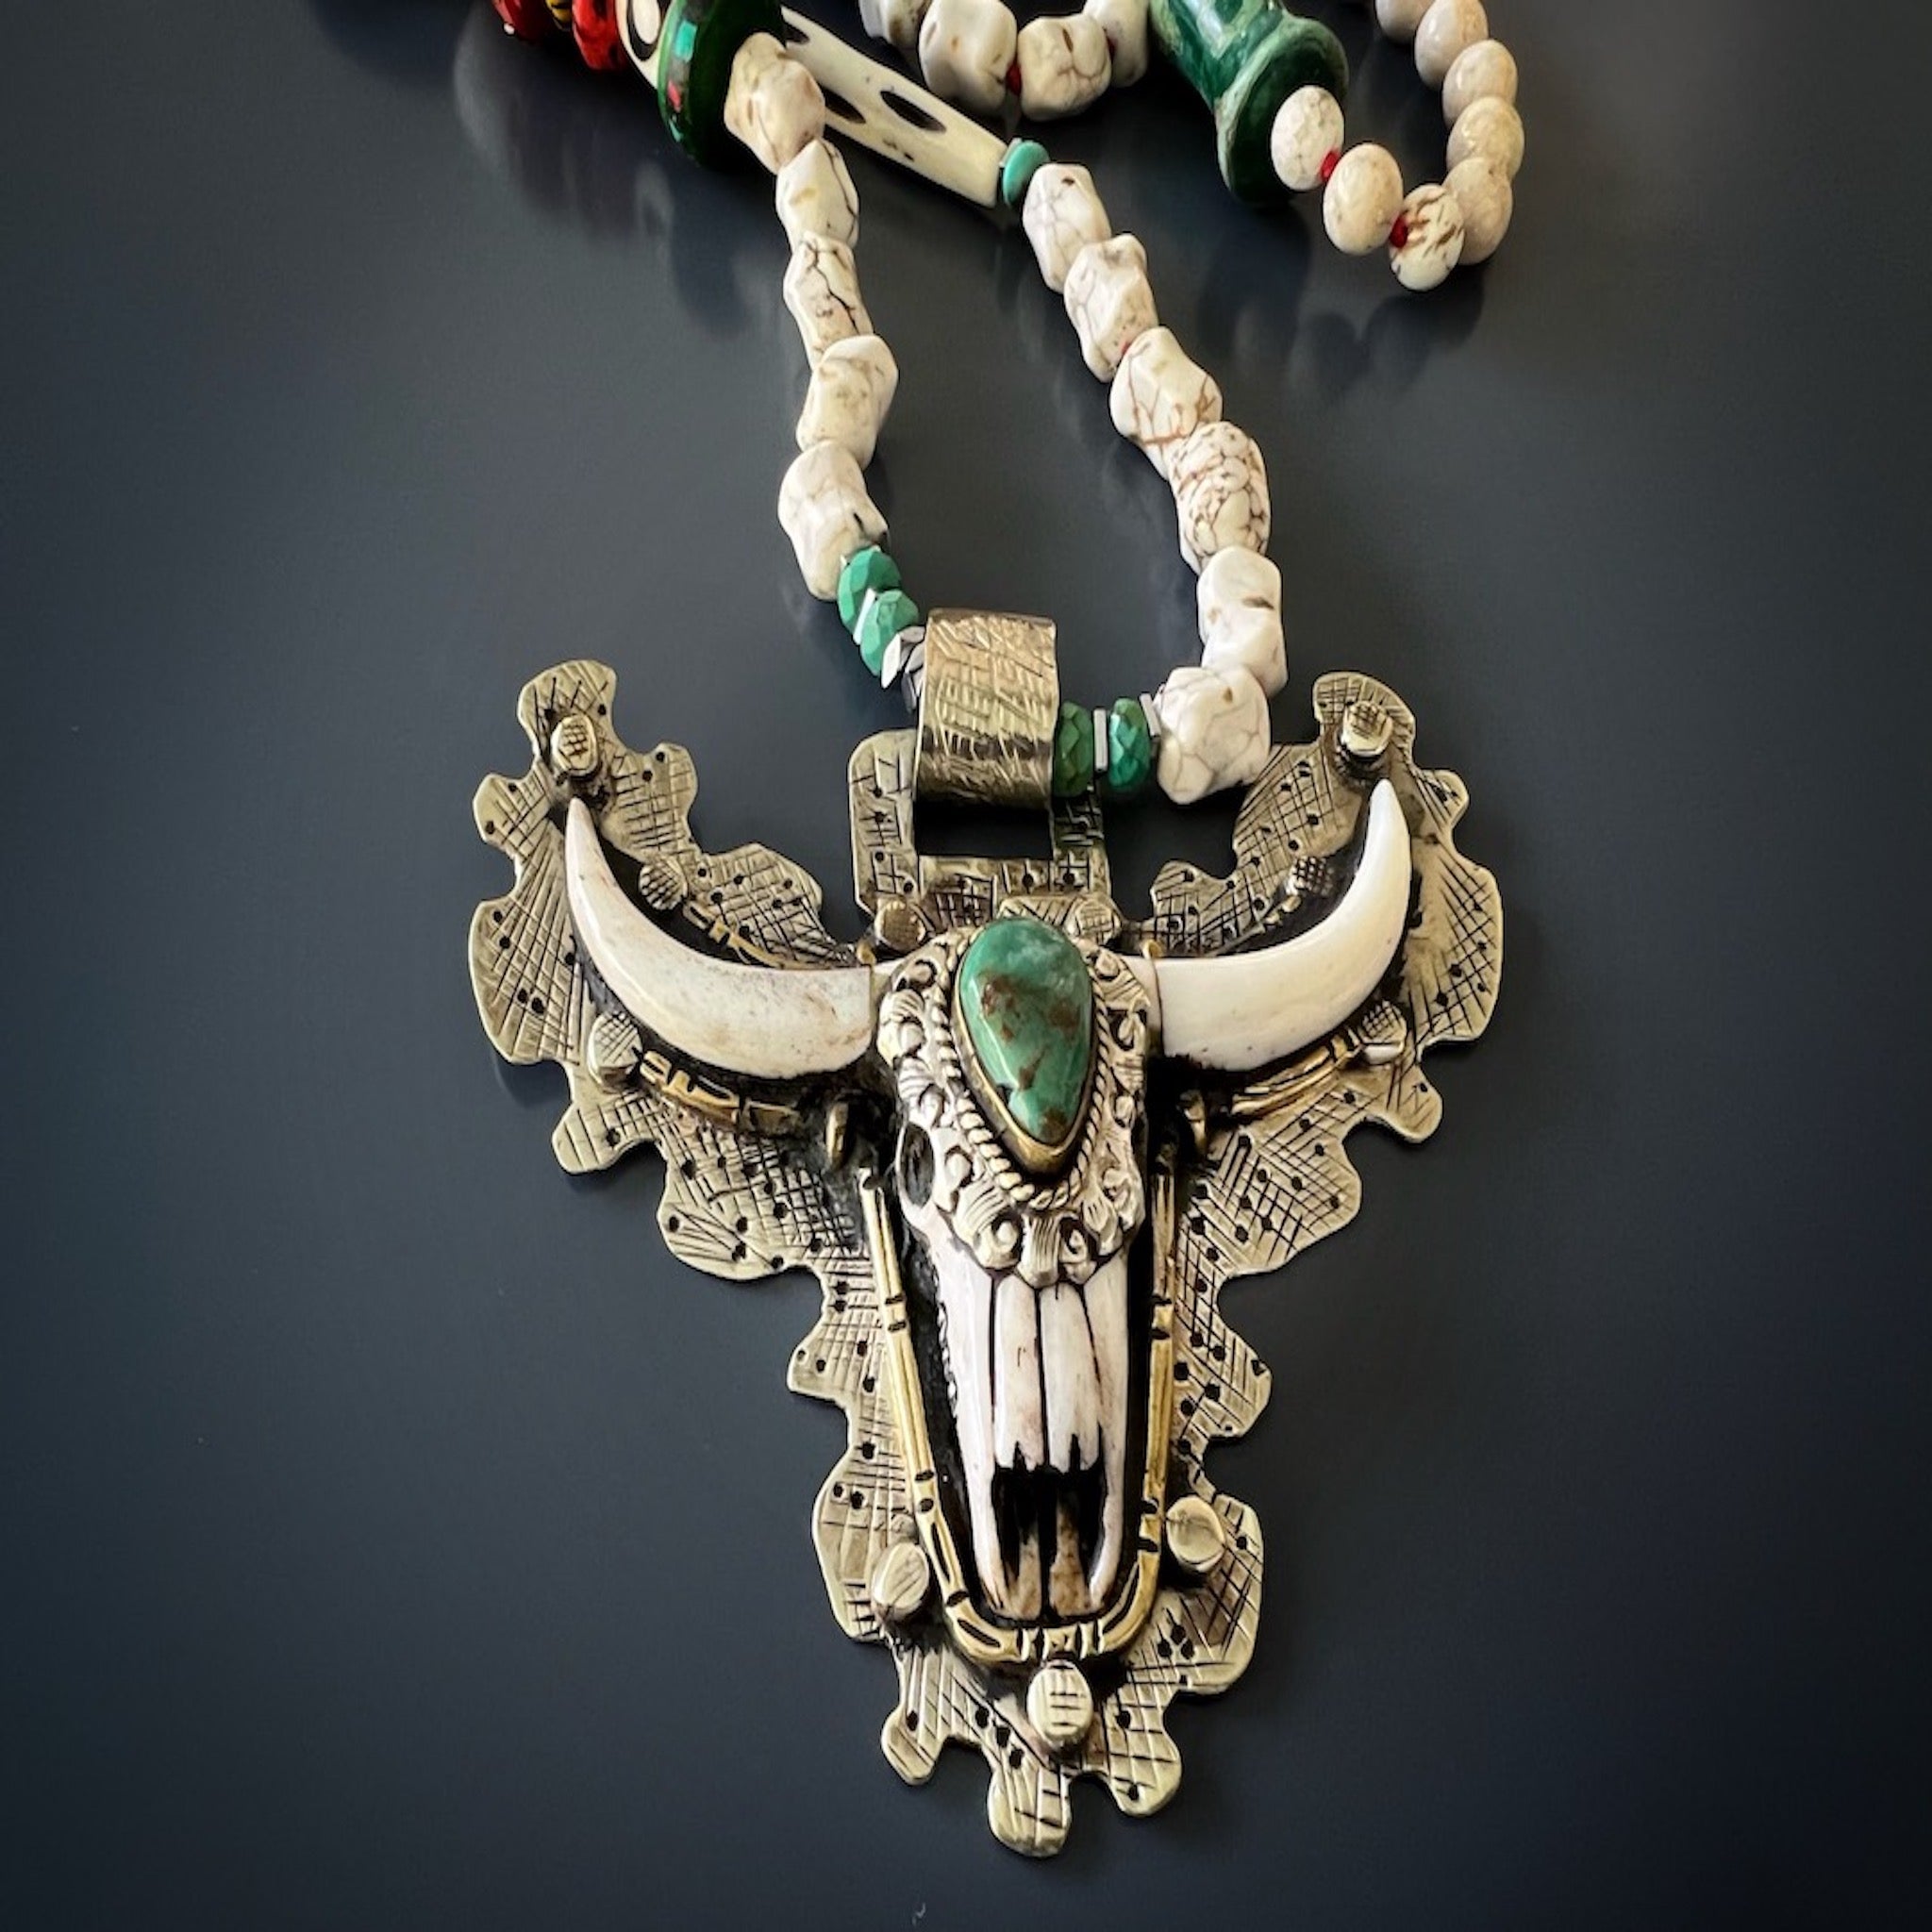 the Mystic Longhorn Unique Necklace, highlighting the beautiful carved longhorn pendant and the combination of colorful beads, creating a captivating and eye-catching accessory.